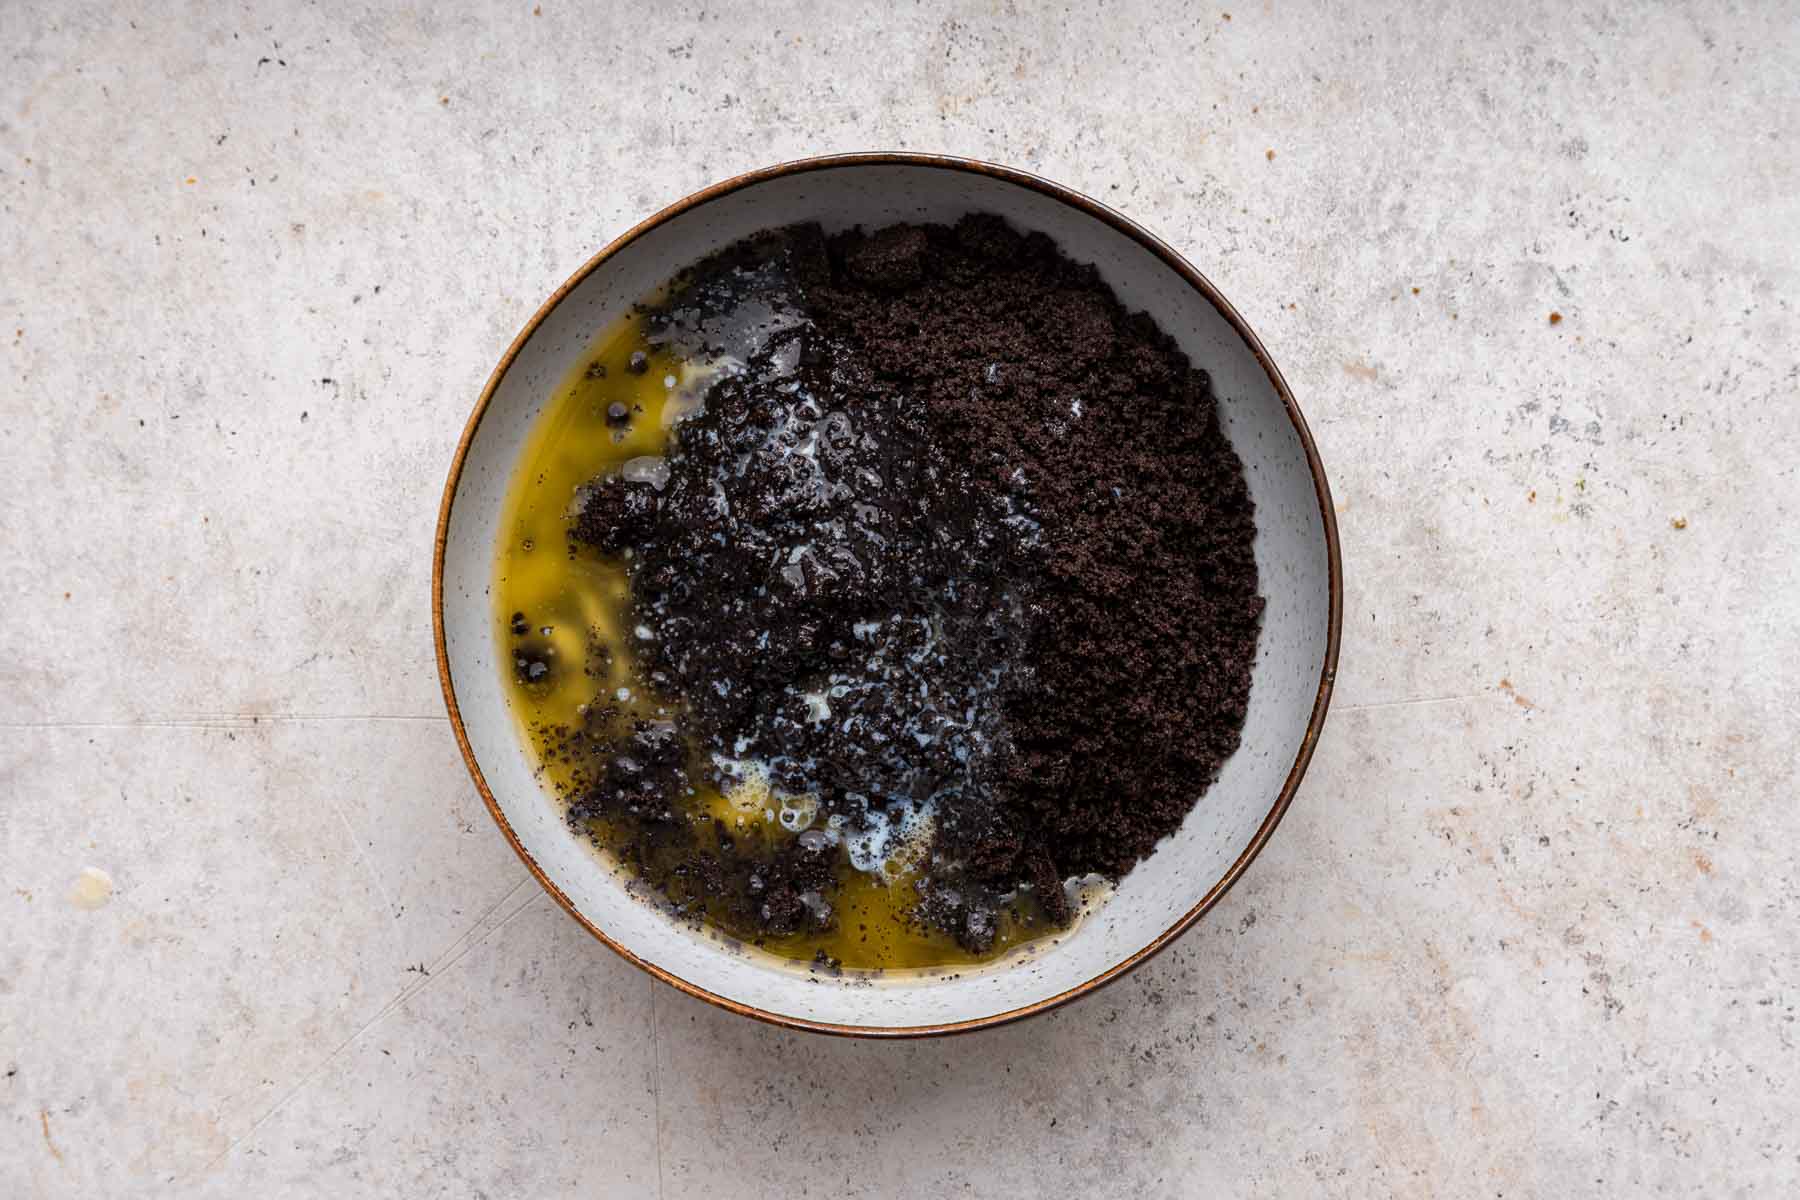 Crushed oreo crumbs in a bowl with yellow melted butter.